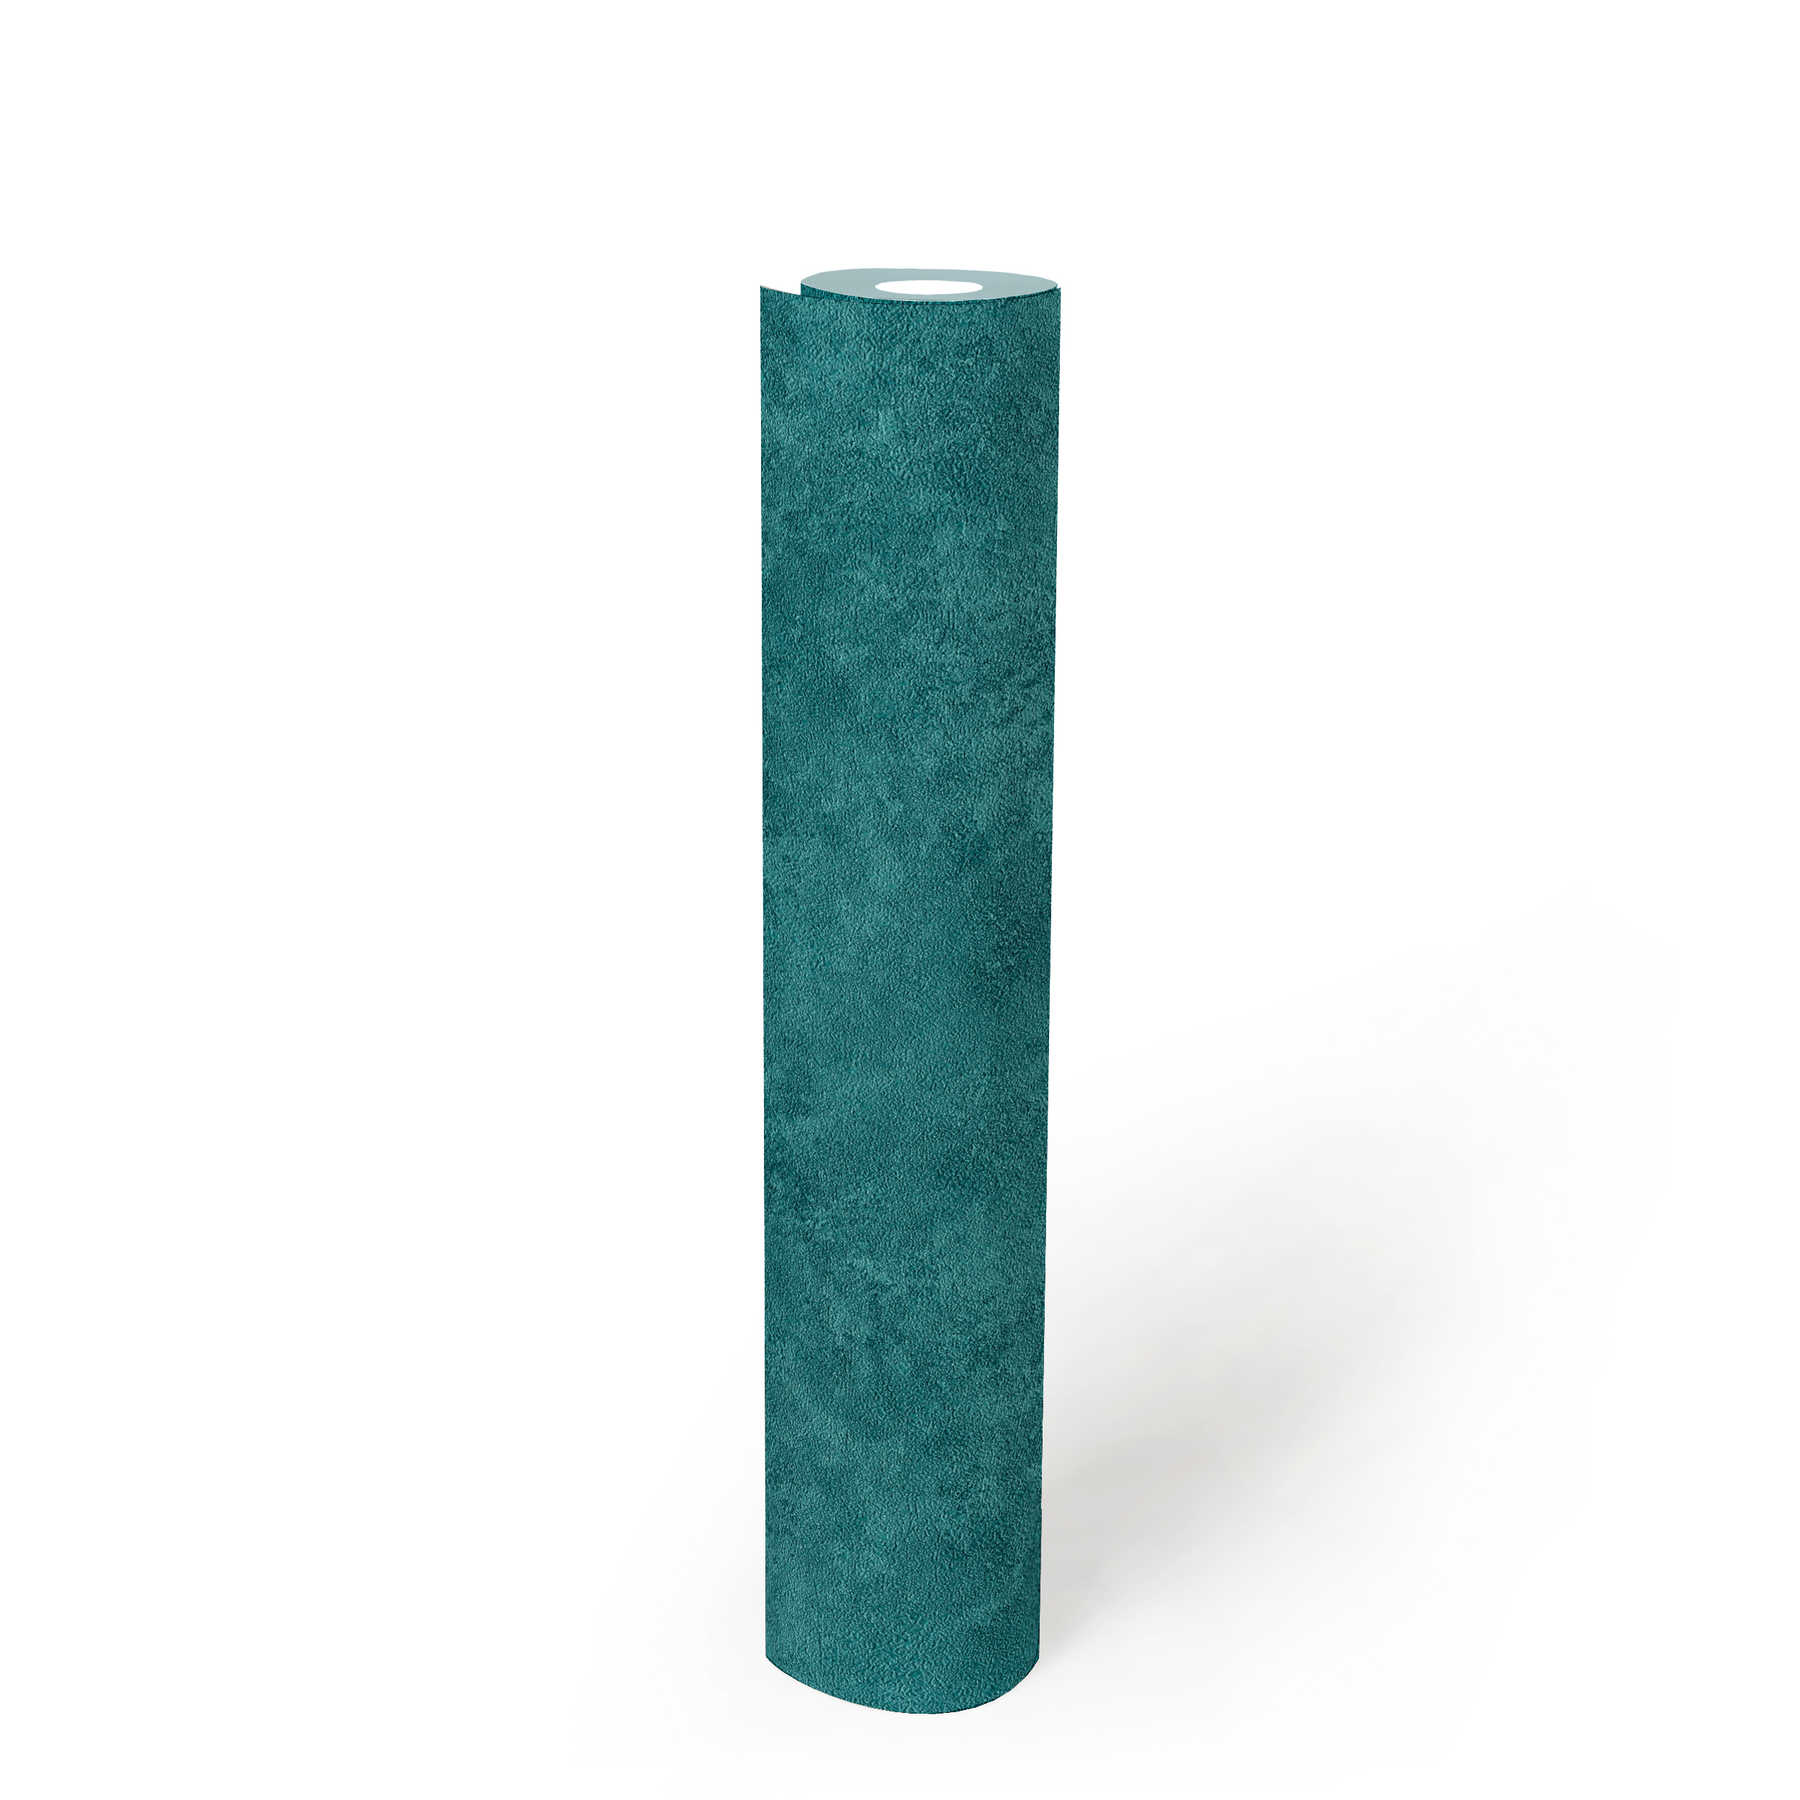             Plain wallpaper colour shaded, natural texture pattern - turquoise, blue, green
        